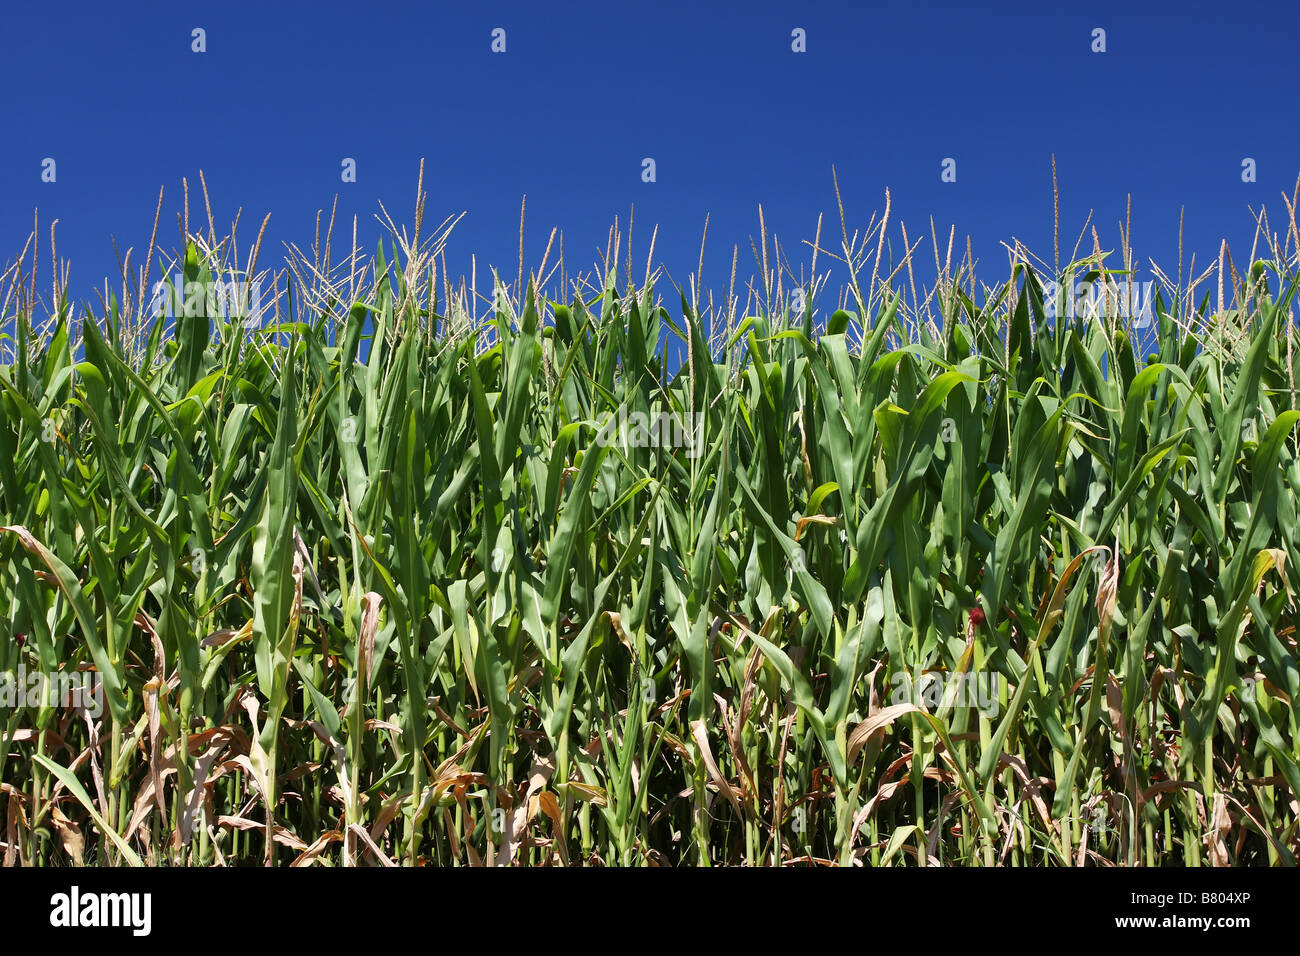 mais corn growing in a cornfield against a blue sky Stock Photo